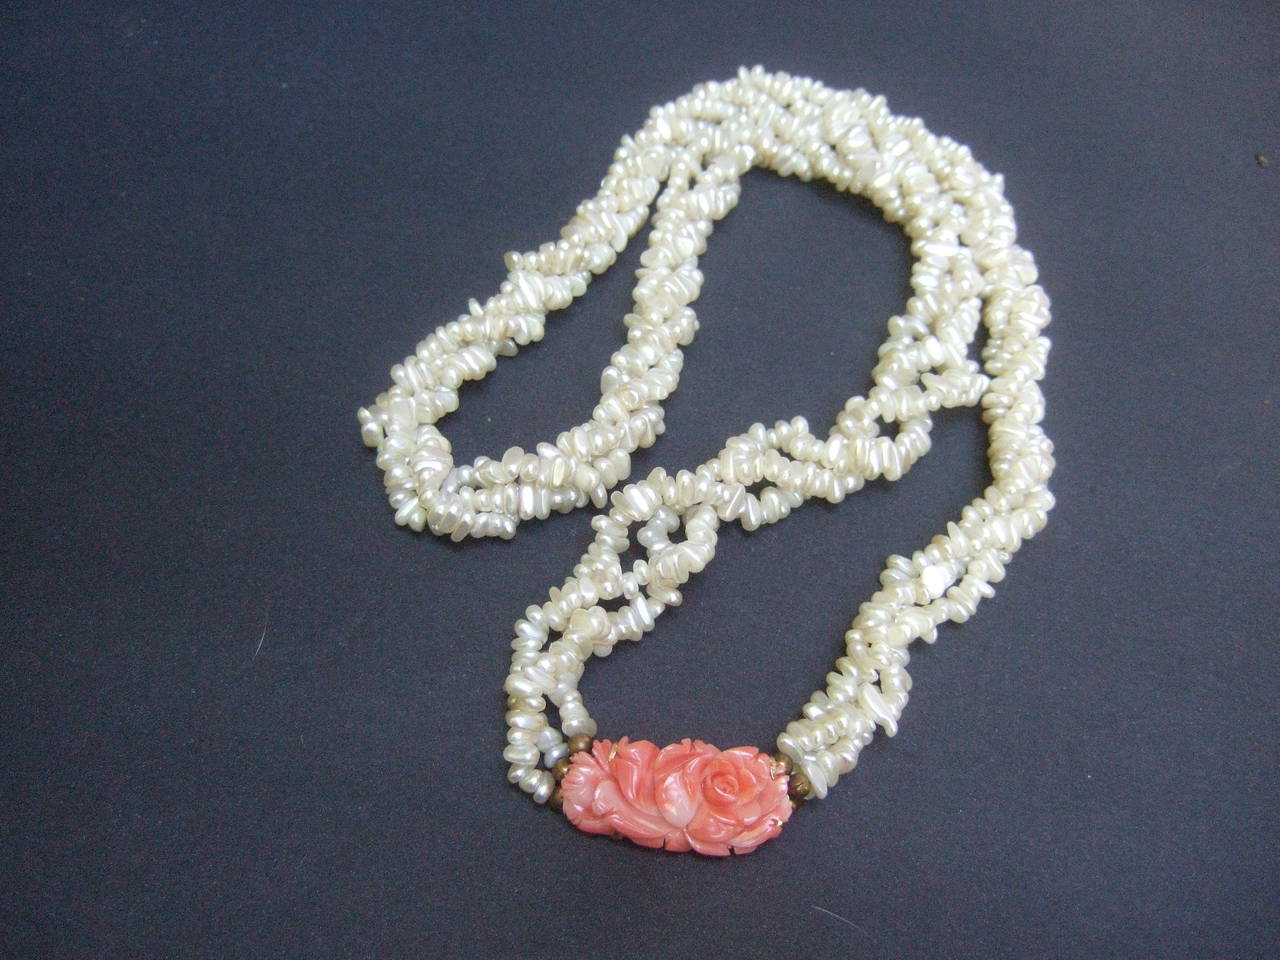 Opulent Freshwater Pearl Carved Coral Braided Necklace In Excellent Condition For Sale In University City, MO